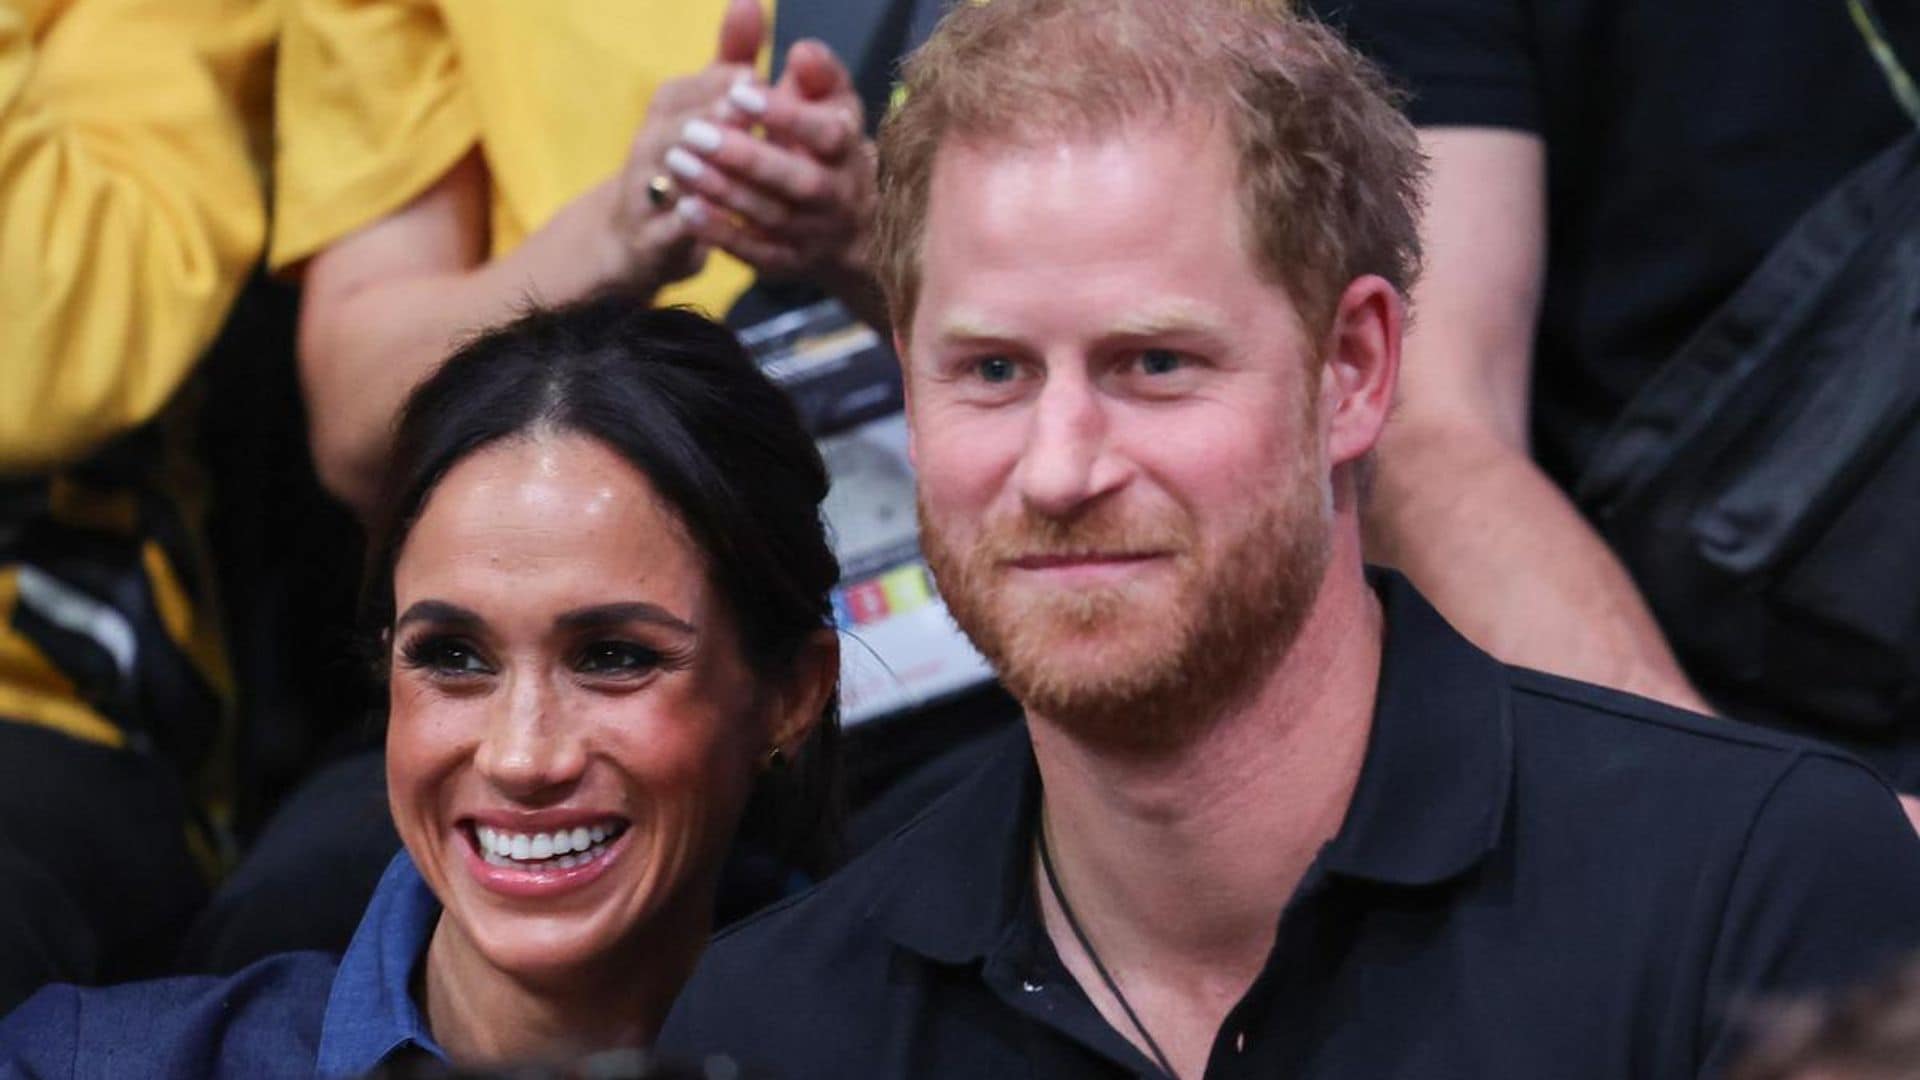 Meghan's mother Doria 'has taken up residence in the Sussexes' guesthouse on the grounds of their Californian mansion,' according to the Express